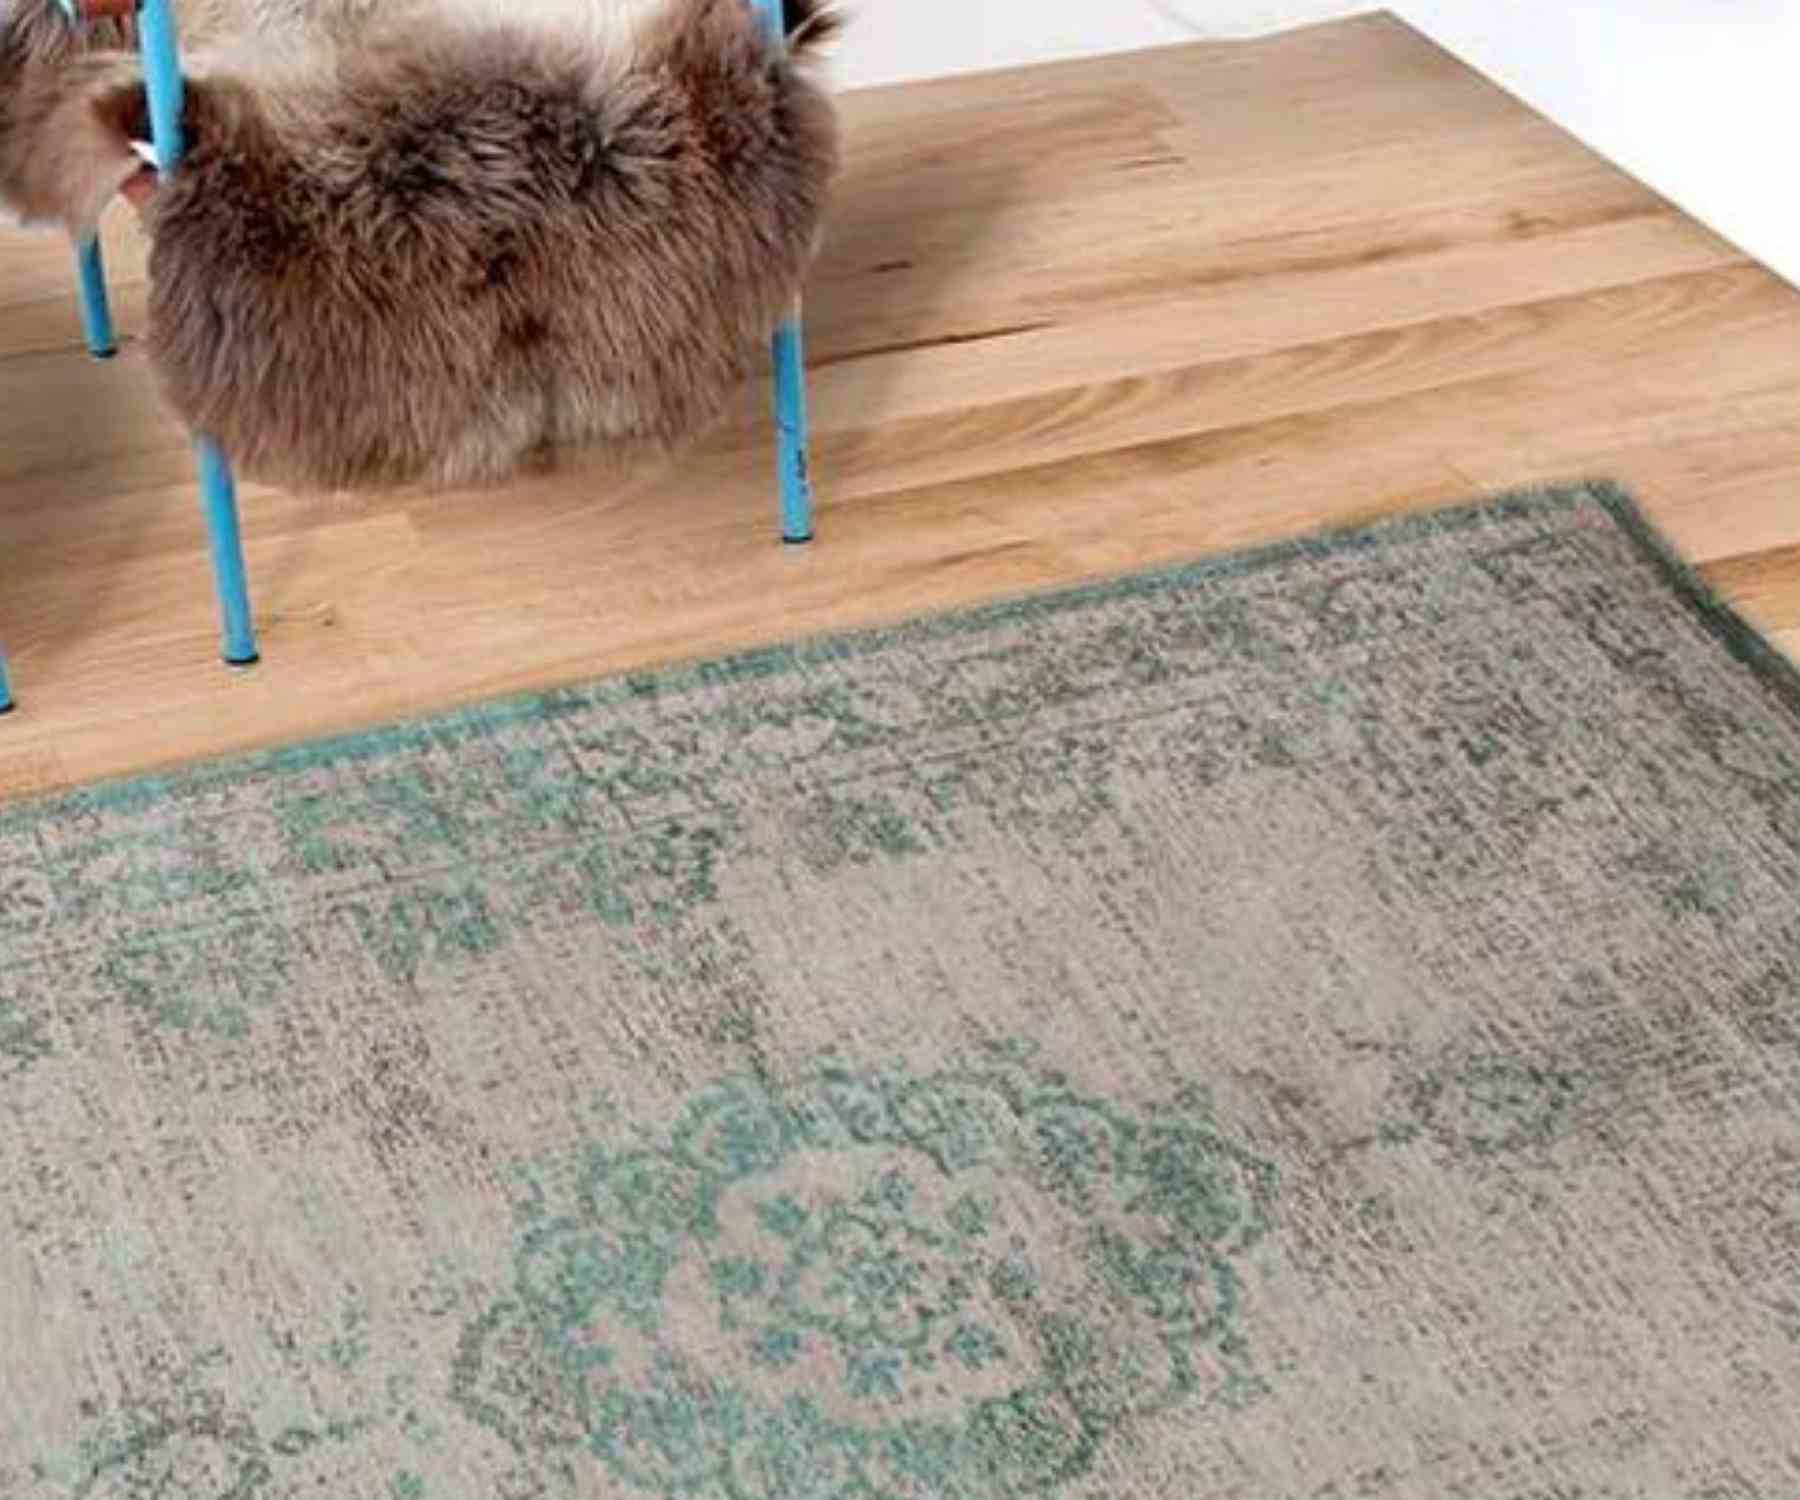 Faded green rug on wooden floor with metal chair and fur throw